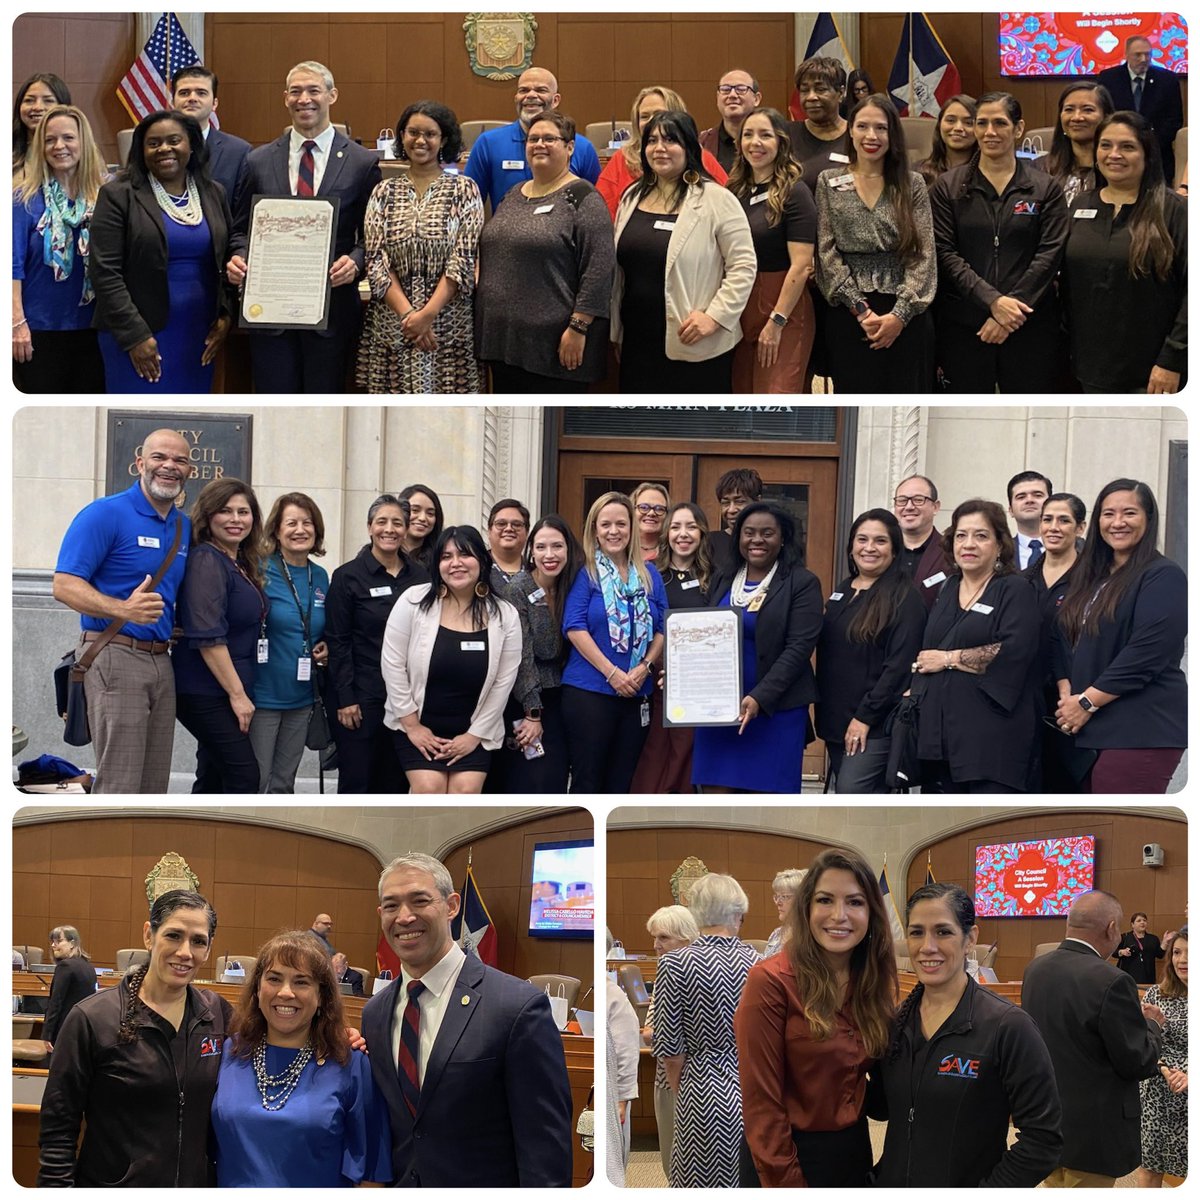 Great to see Mayor @Ron_Nirenberg, @COSAGOV and @SAMetroHealth at the official proclamation of #DiabetesAwarenessMonth last Thurs, along with community leaders @YMCAsatx and @AmDiabetesAssn. Exciting to see the progress in addressing #SDoH where #TogetherWeCanMakeADifference!